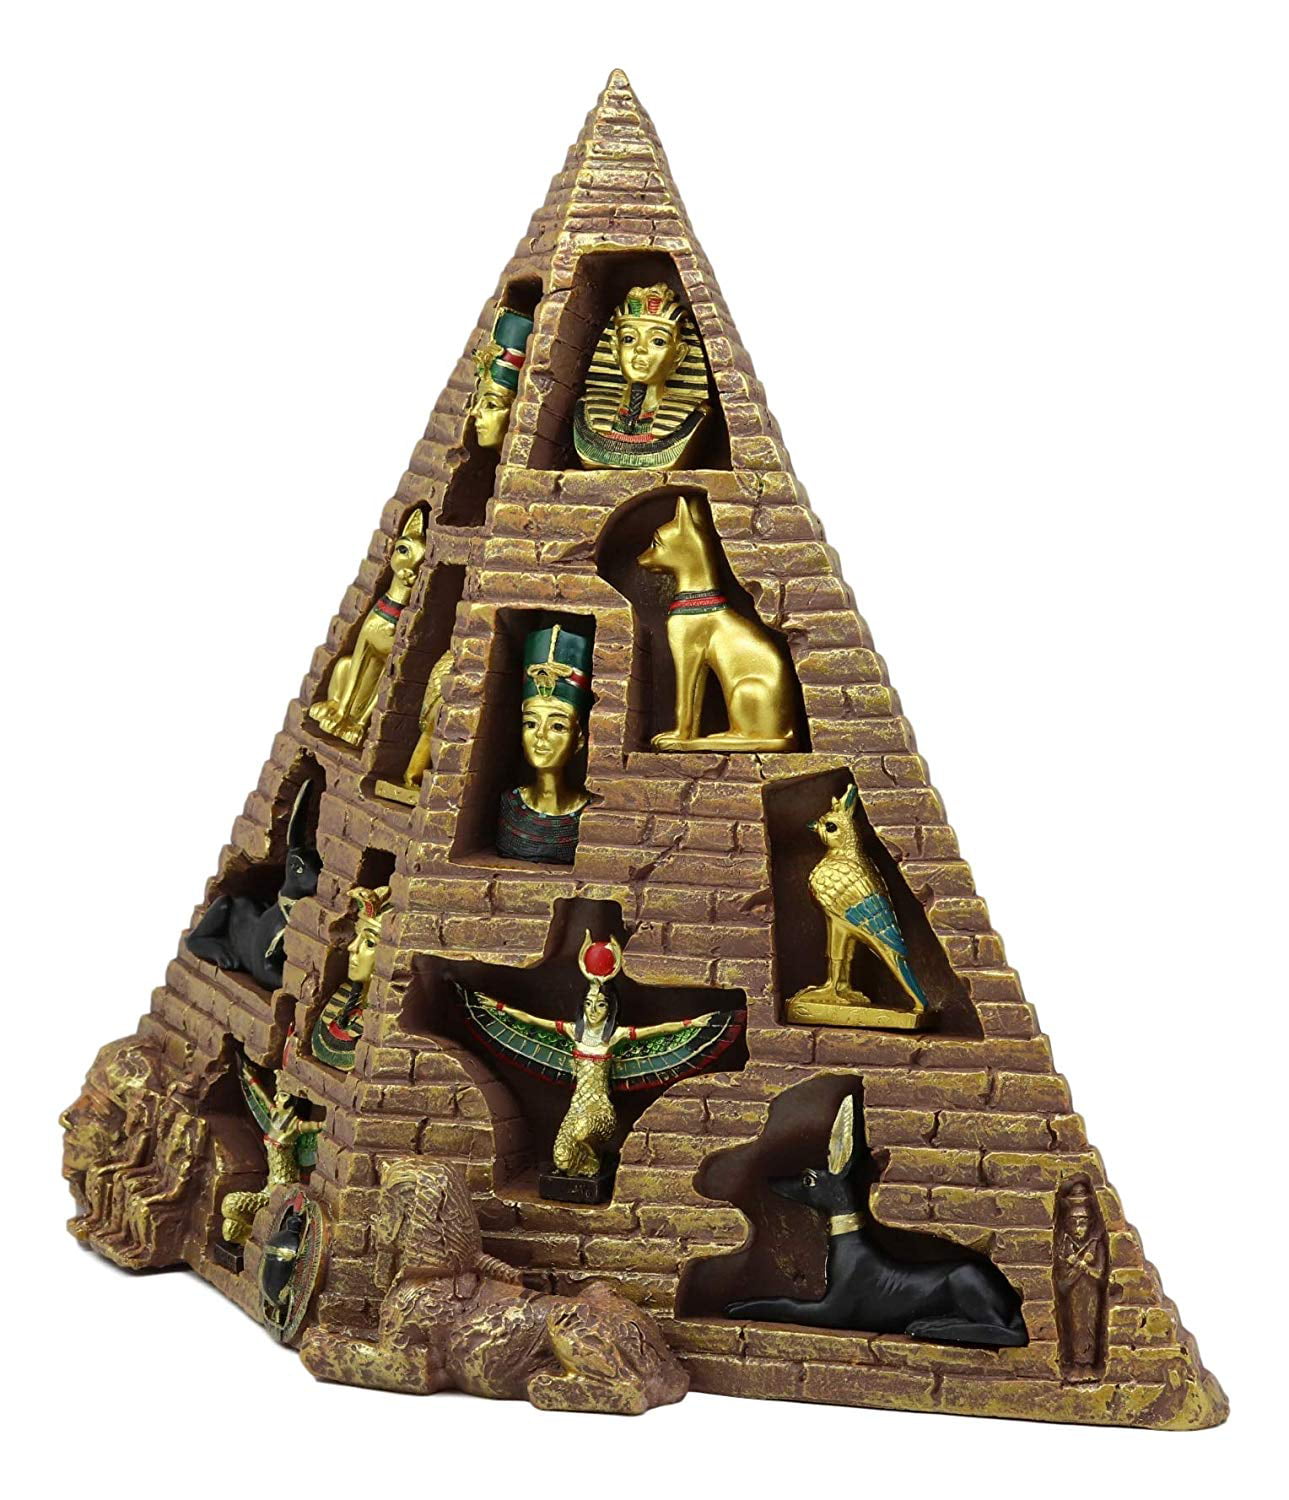 Details about   Ebros Small Golden Ancient Egyptian Giza Golden Pyramid Figurine with LED 1.75"H 